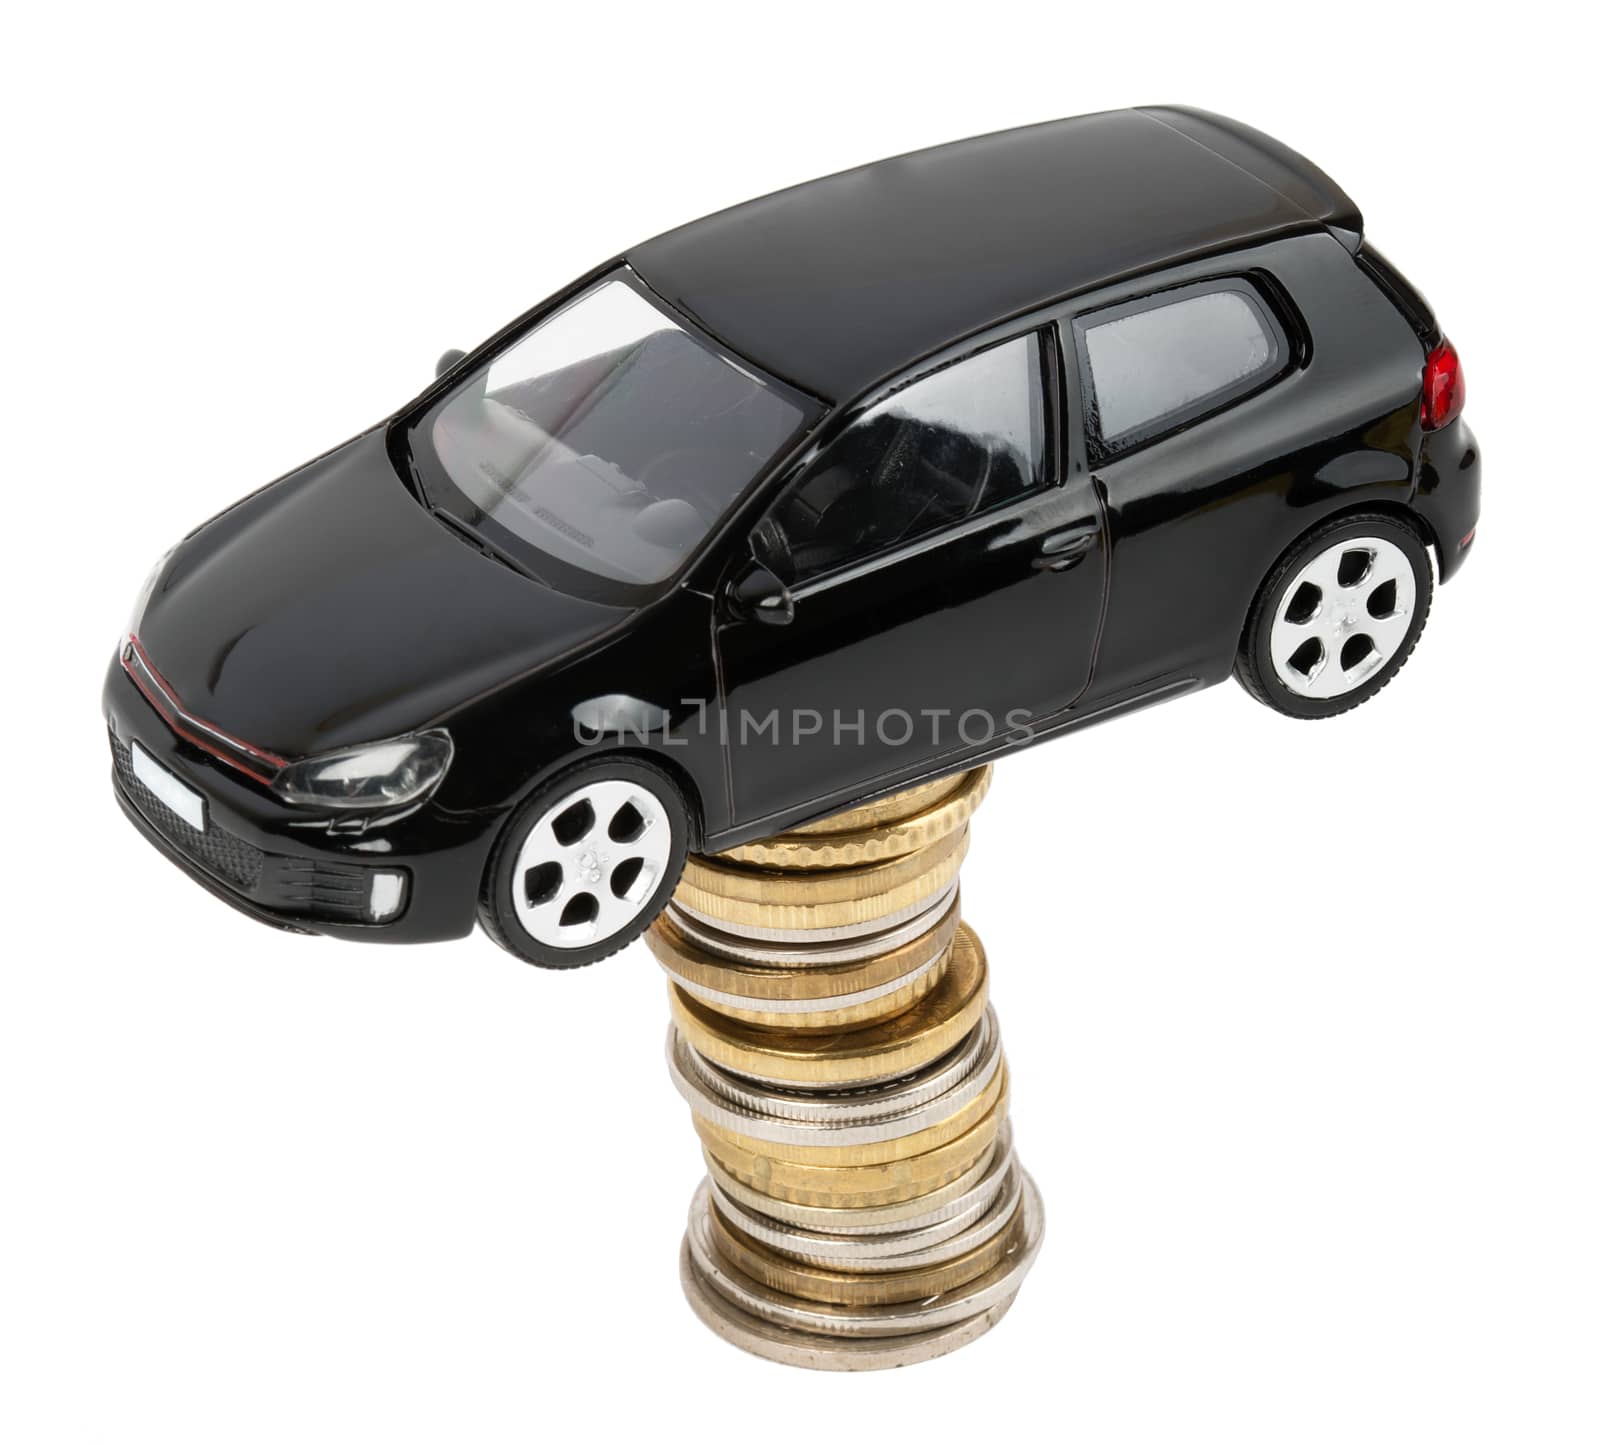 Car on stack of coins isolated on white background, top view